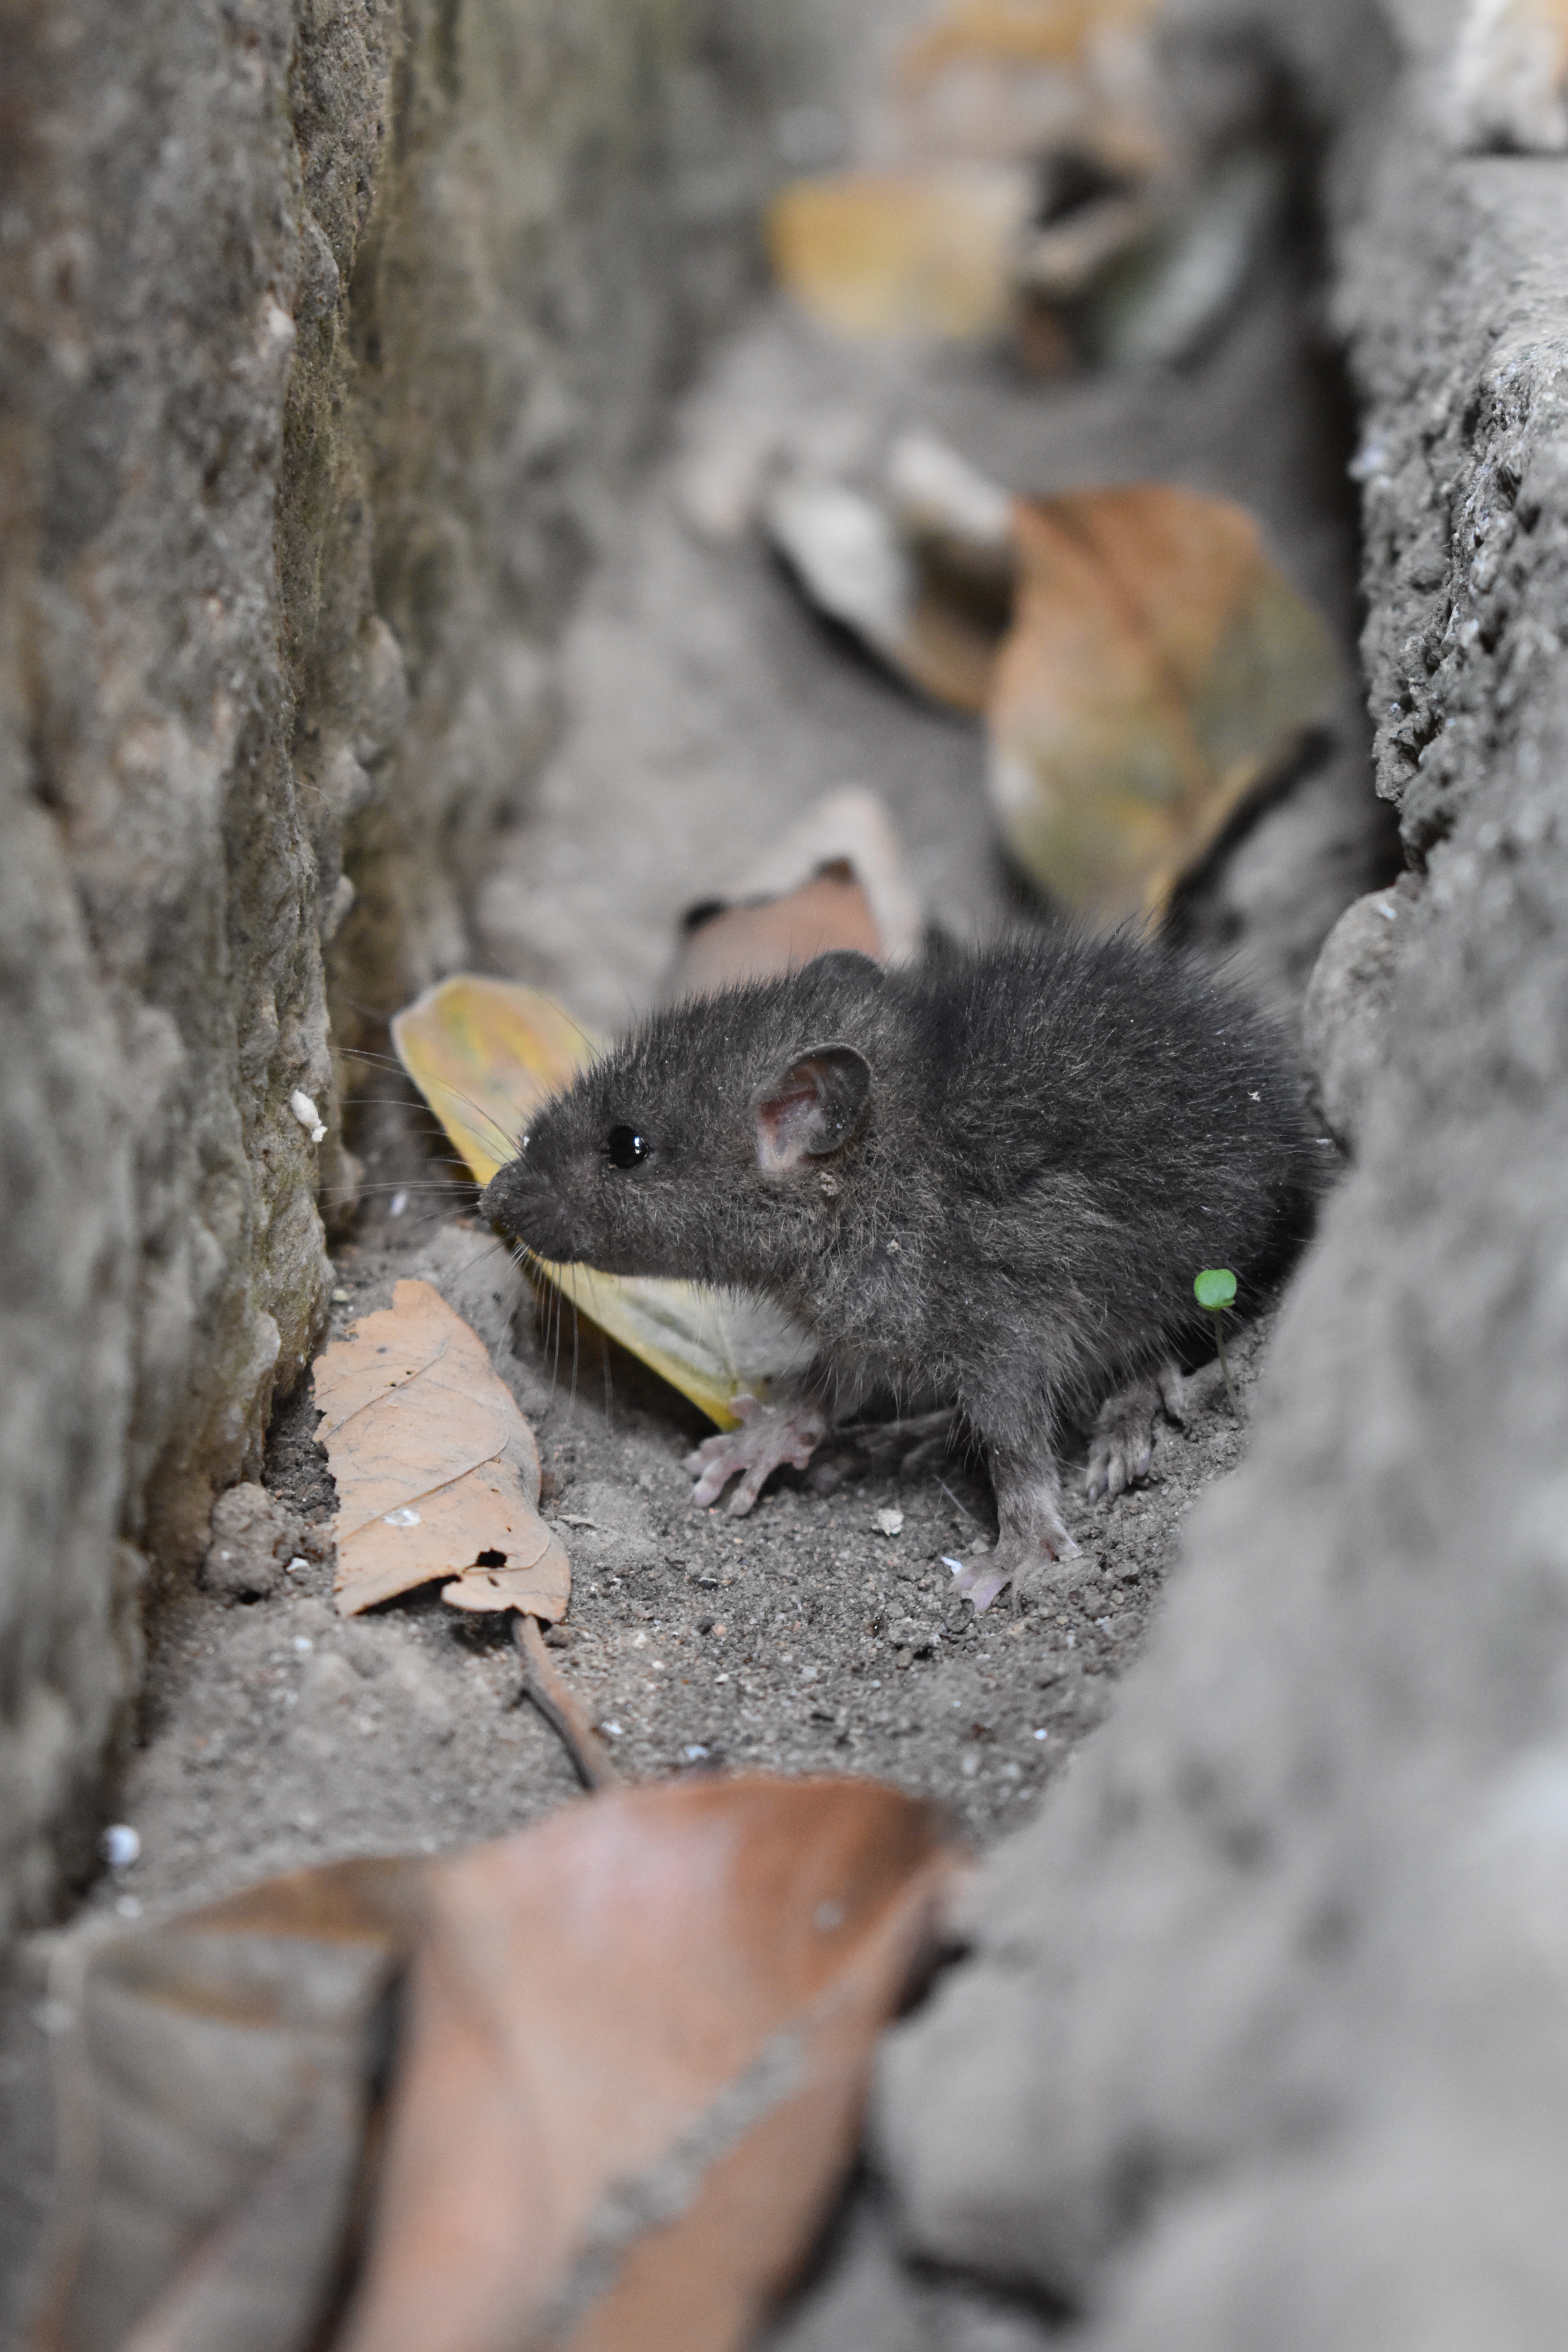 A small gray mouse in a crack in the pavement.